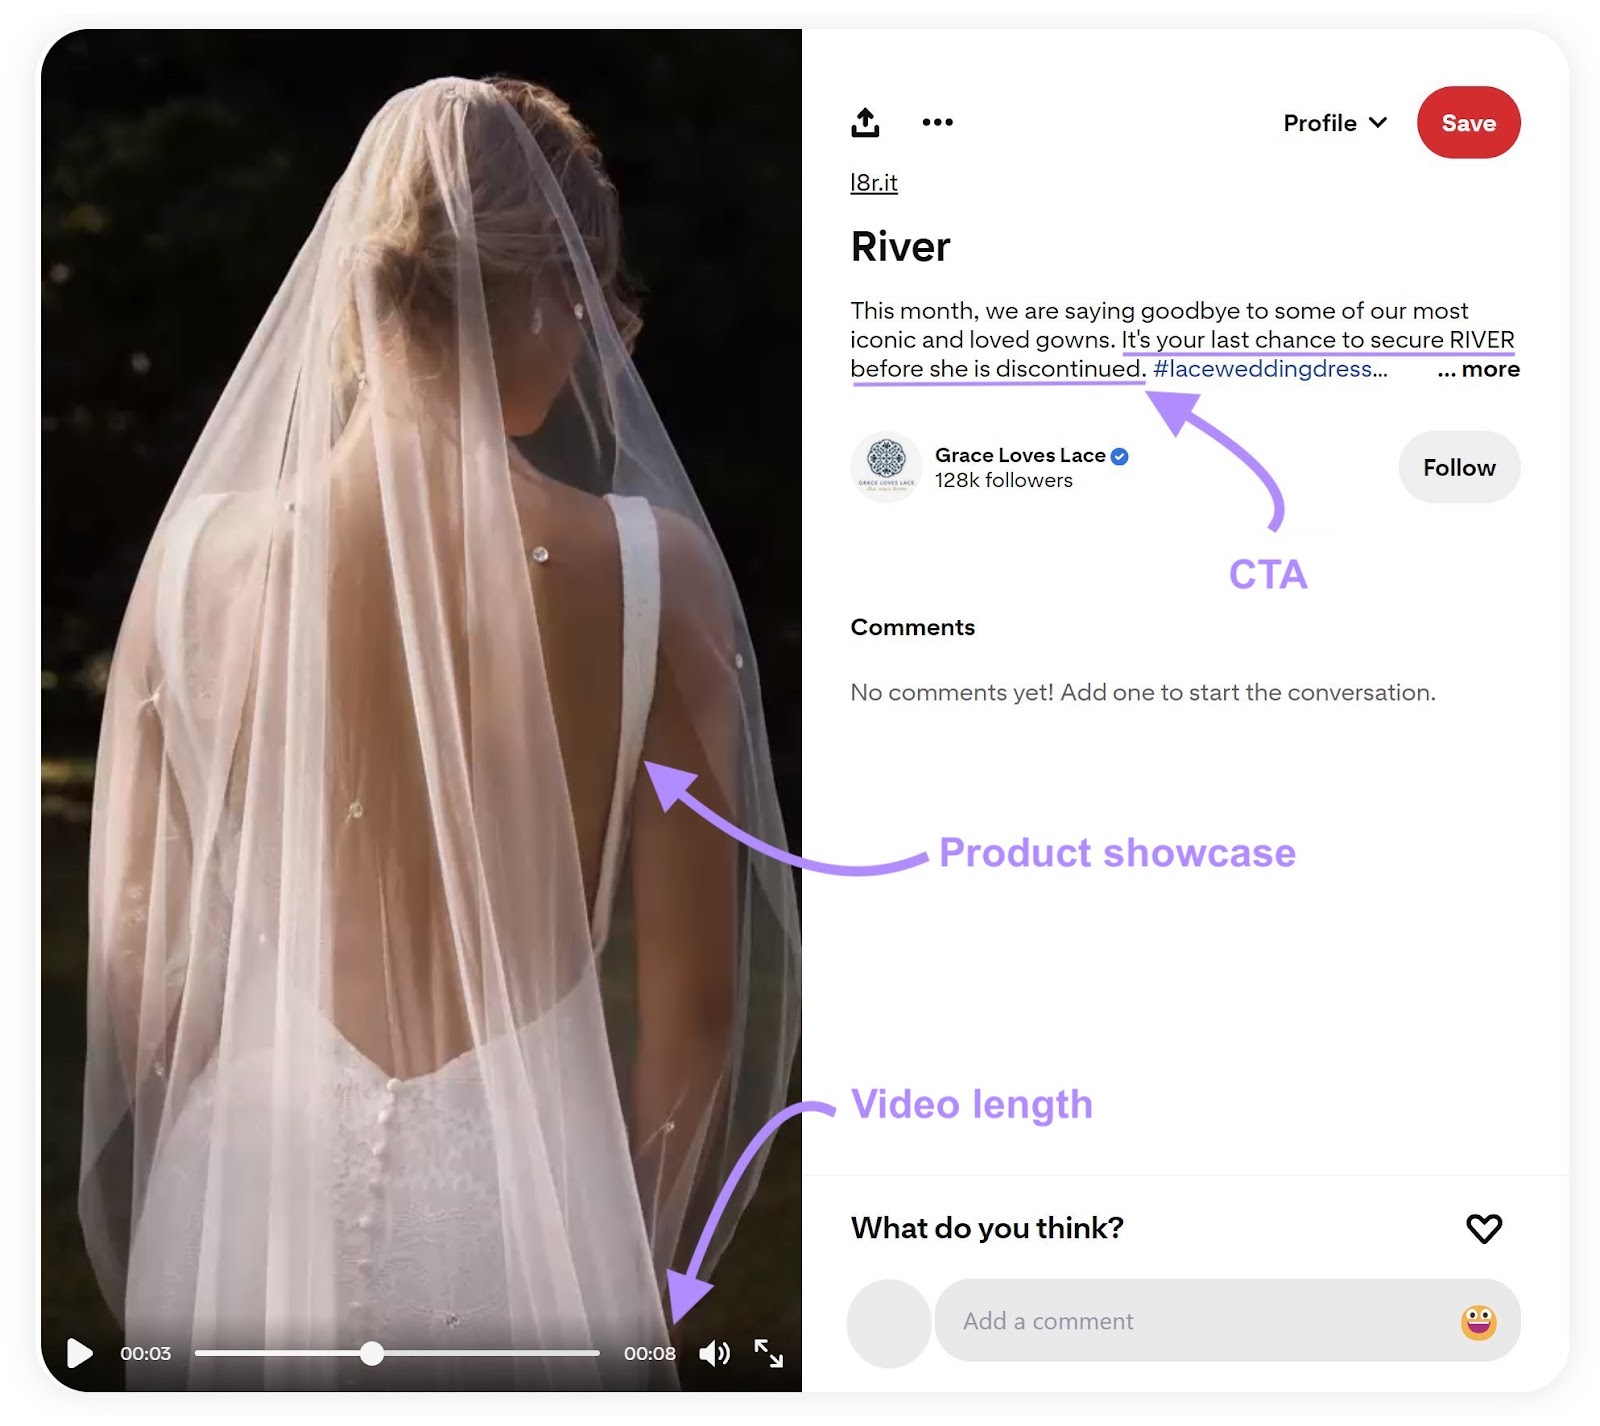 River's Pinterest video with CTA, merchandise  showcase, and video magnitude   elements marked